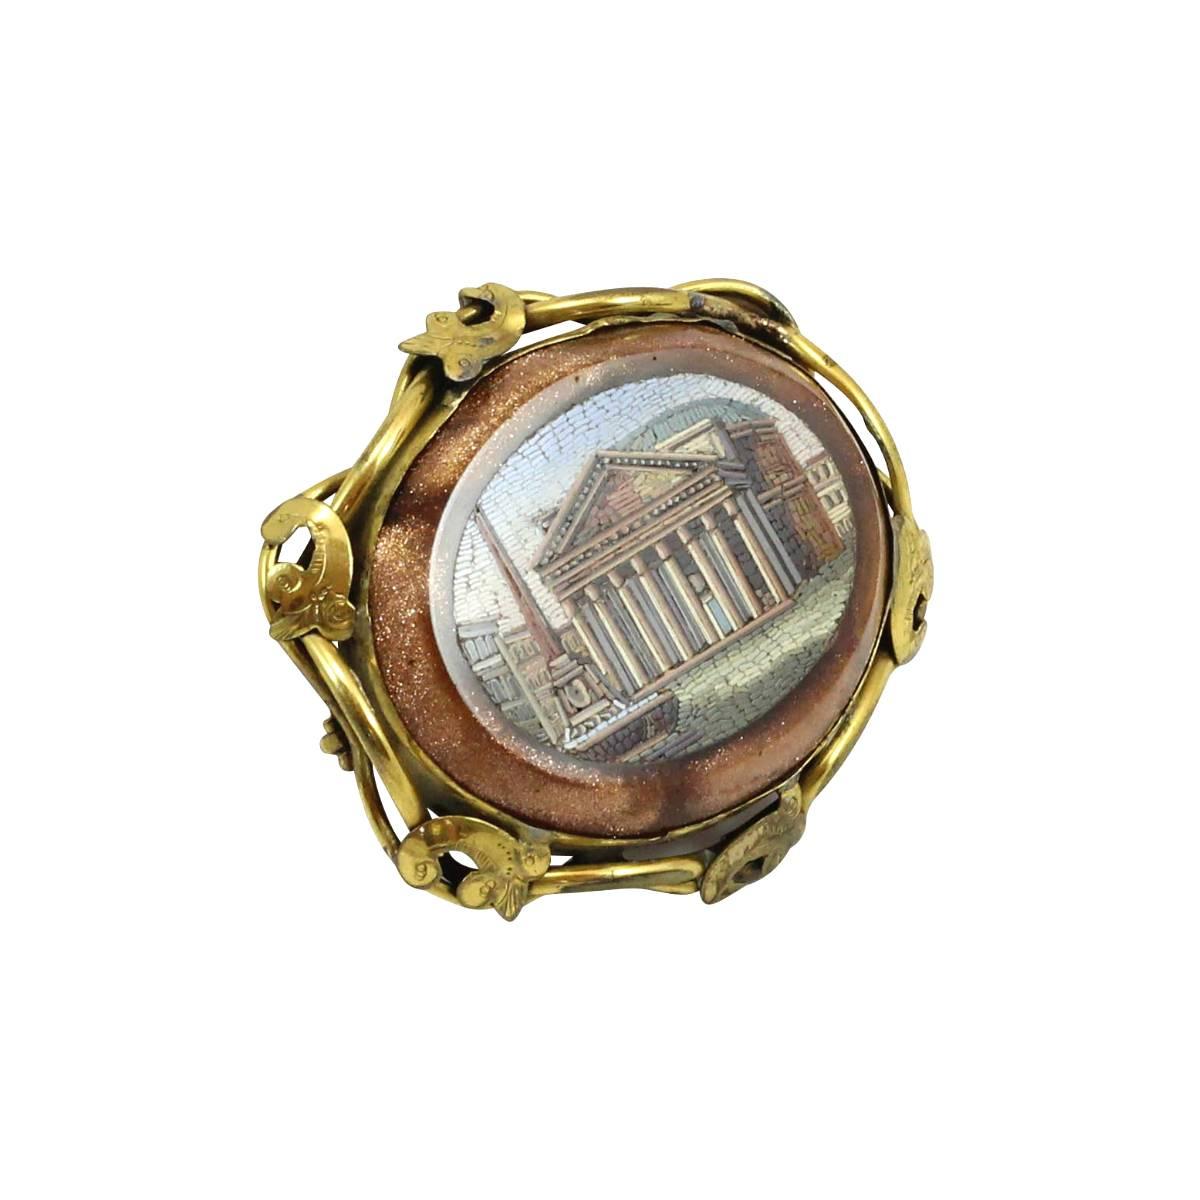 A 19th century Italian micromosaic brooch depicting the Pantheon in Rome. The mosaic is set in goldstone (also known as adventurine glass), of which the process of creation was attributed to the Miotti family in 17th century Venice. A specialty of